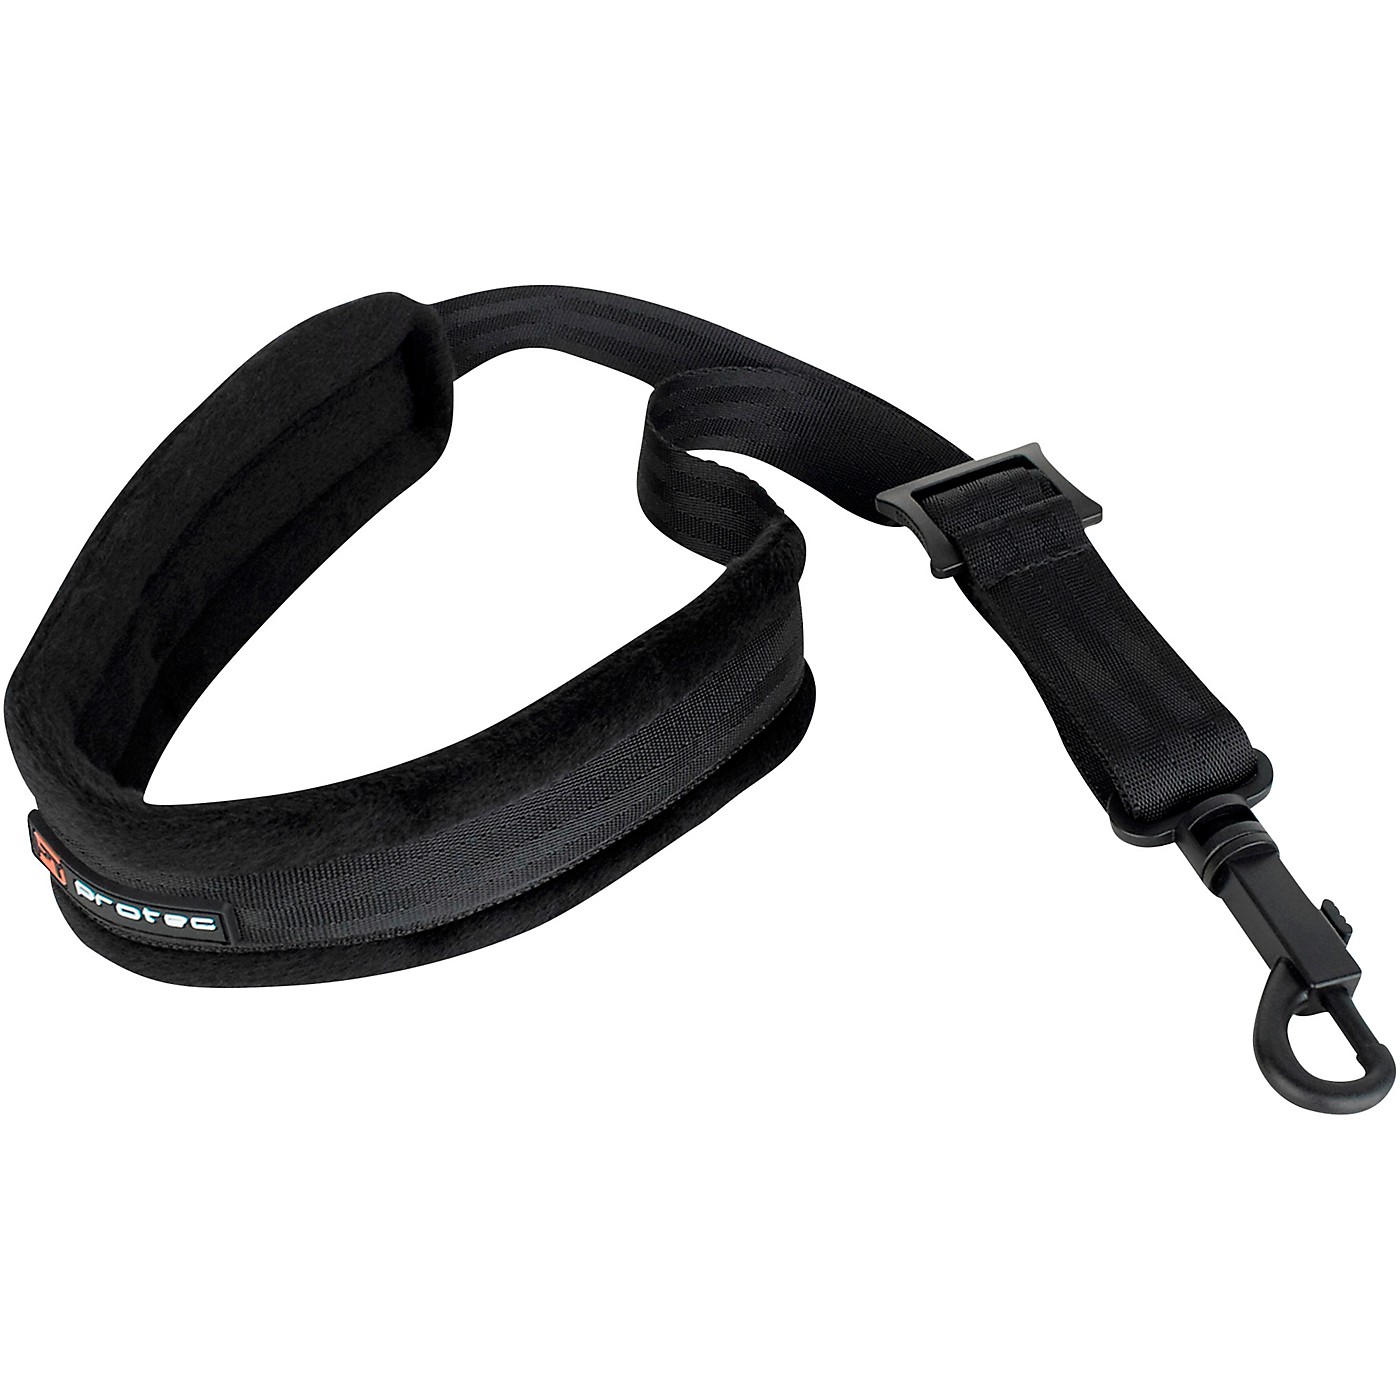 Protec Saxophone Neck Strap with Velour Neck Pad and Plastic Swivel Snap, 24-in. Length thumbnail